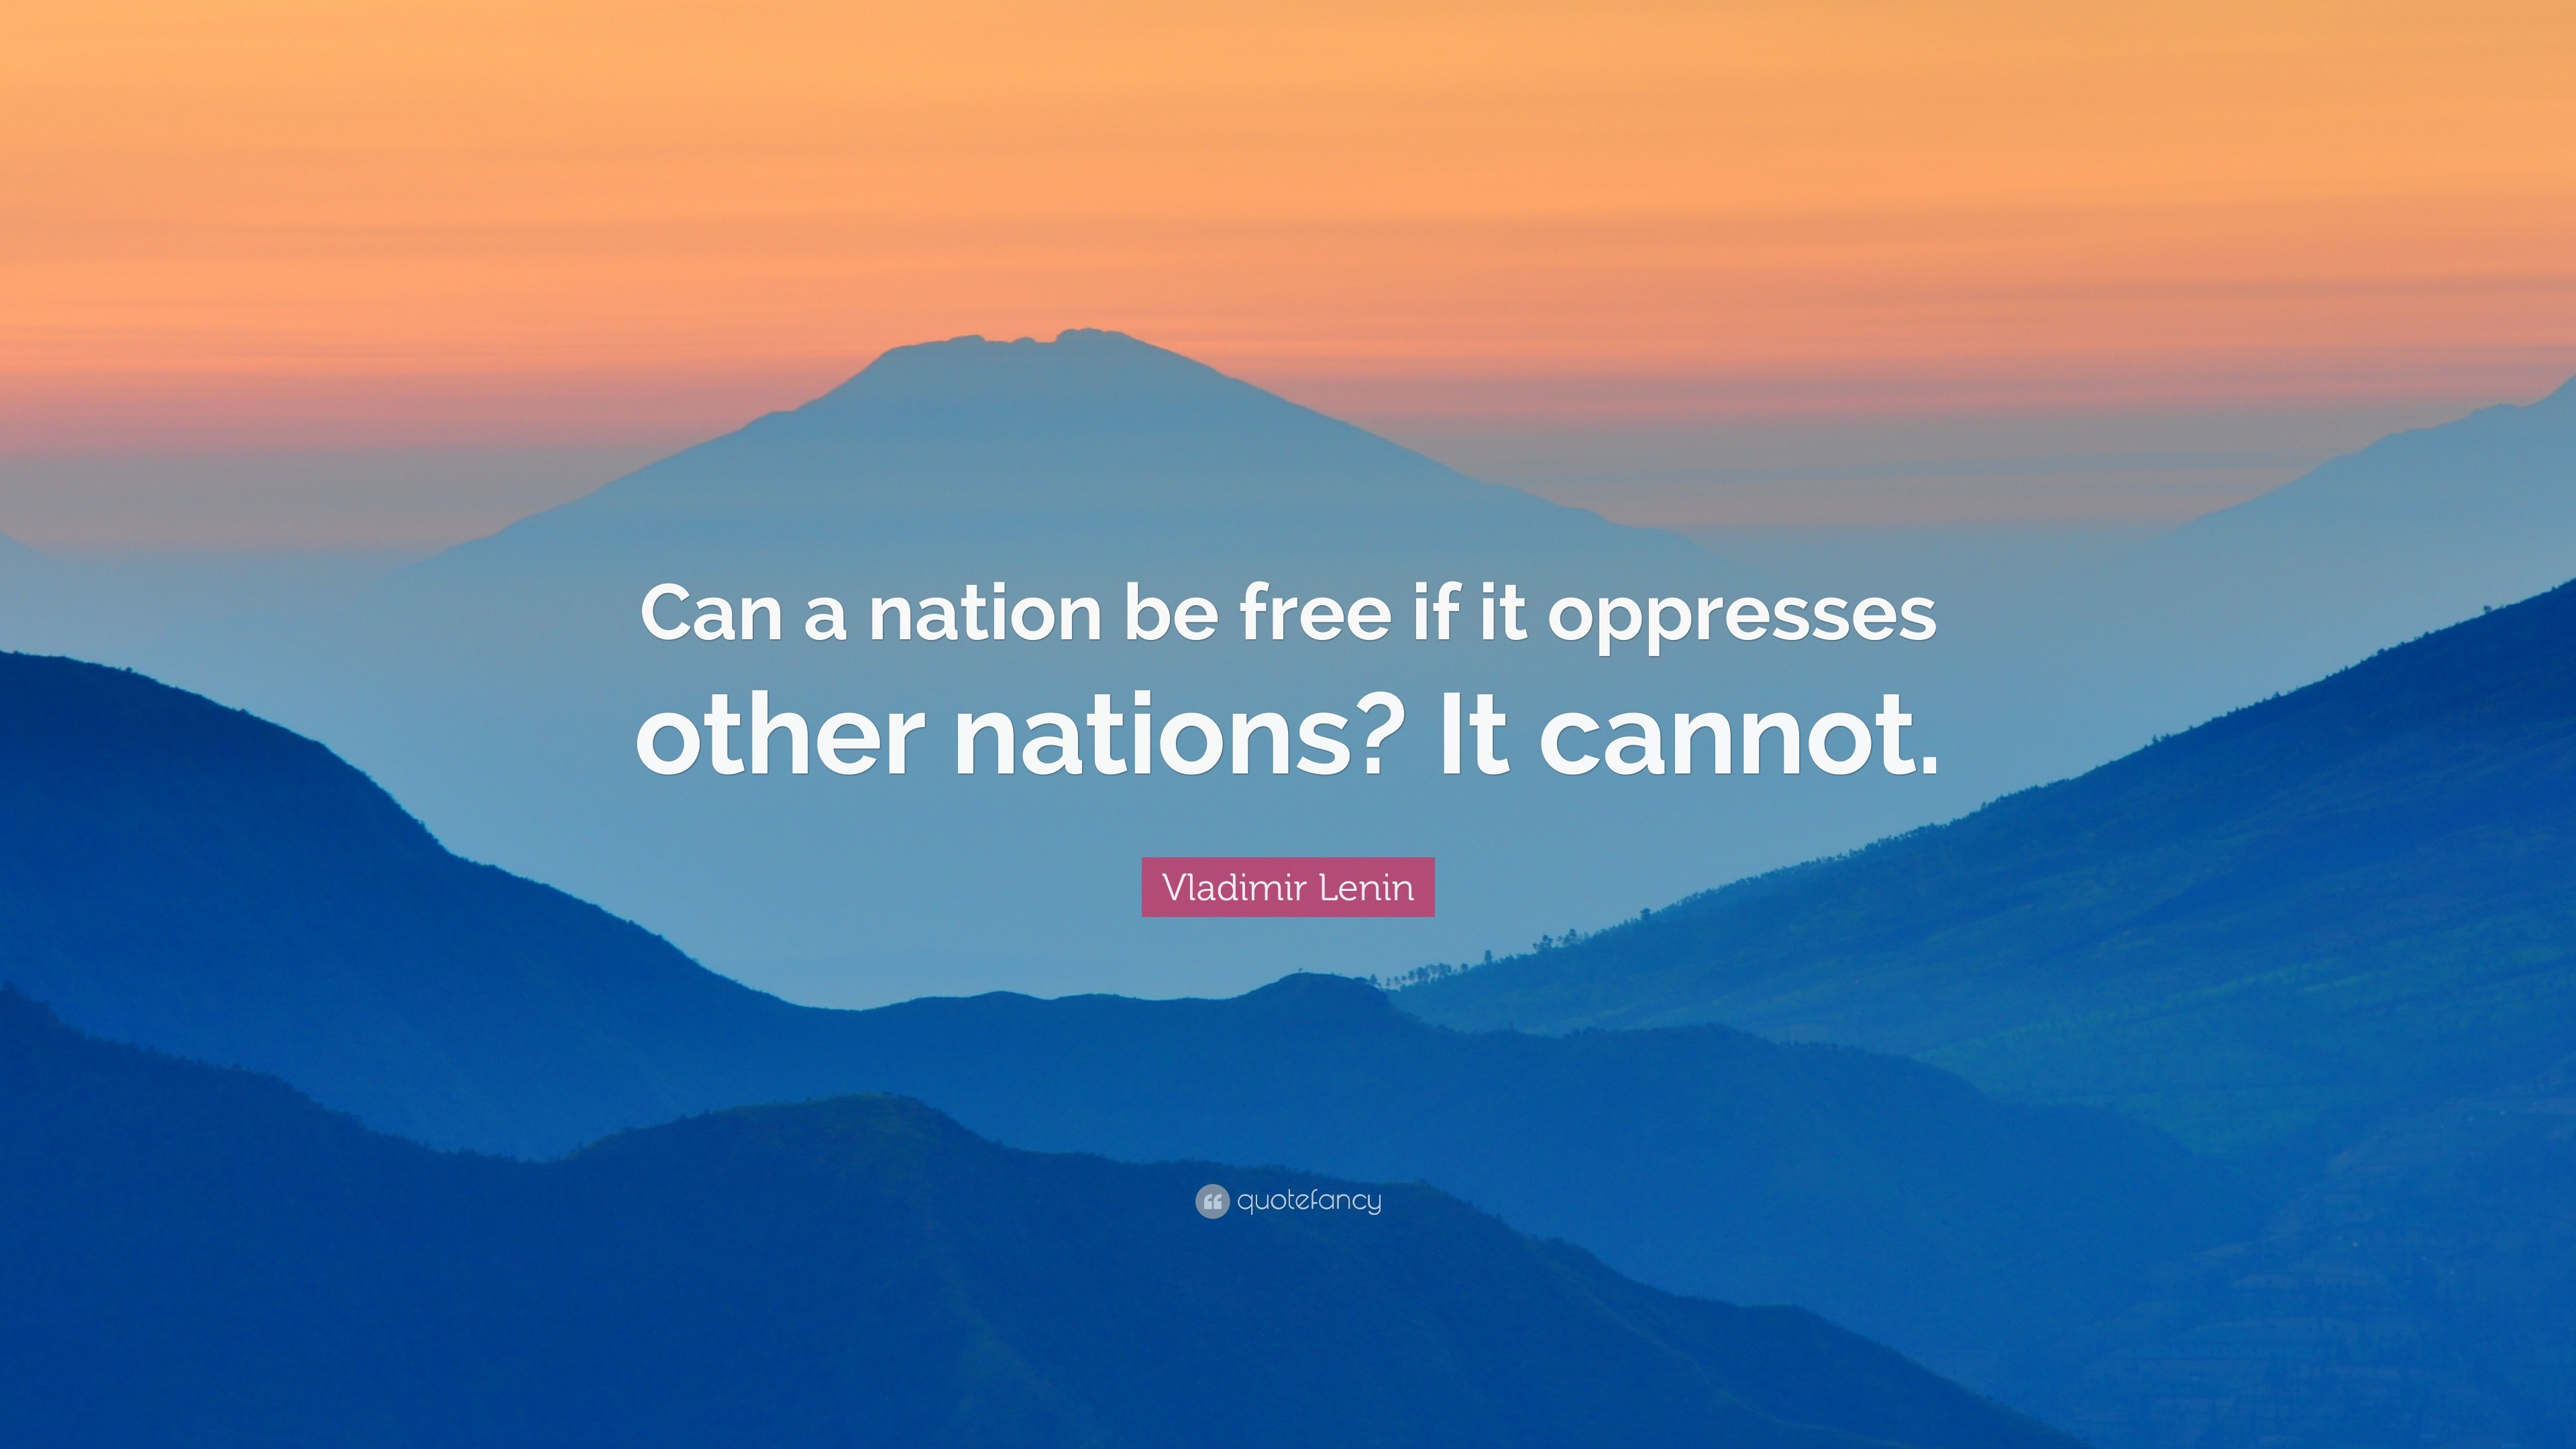 3840x2160 Vladimir Lenin Quote: “Can a nation be free if it oppresses other nations?